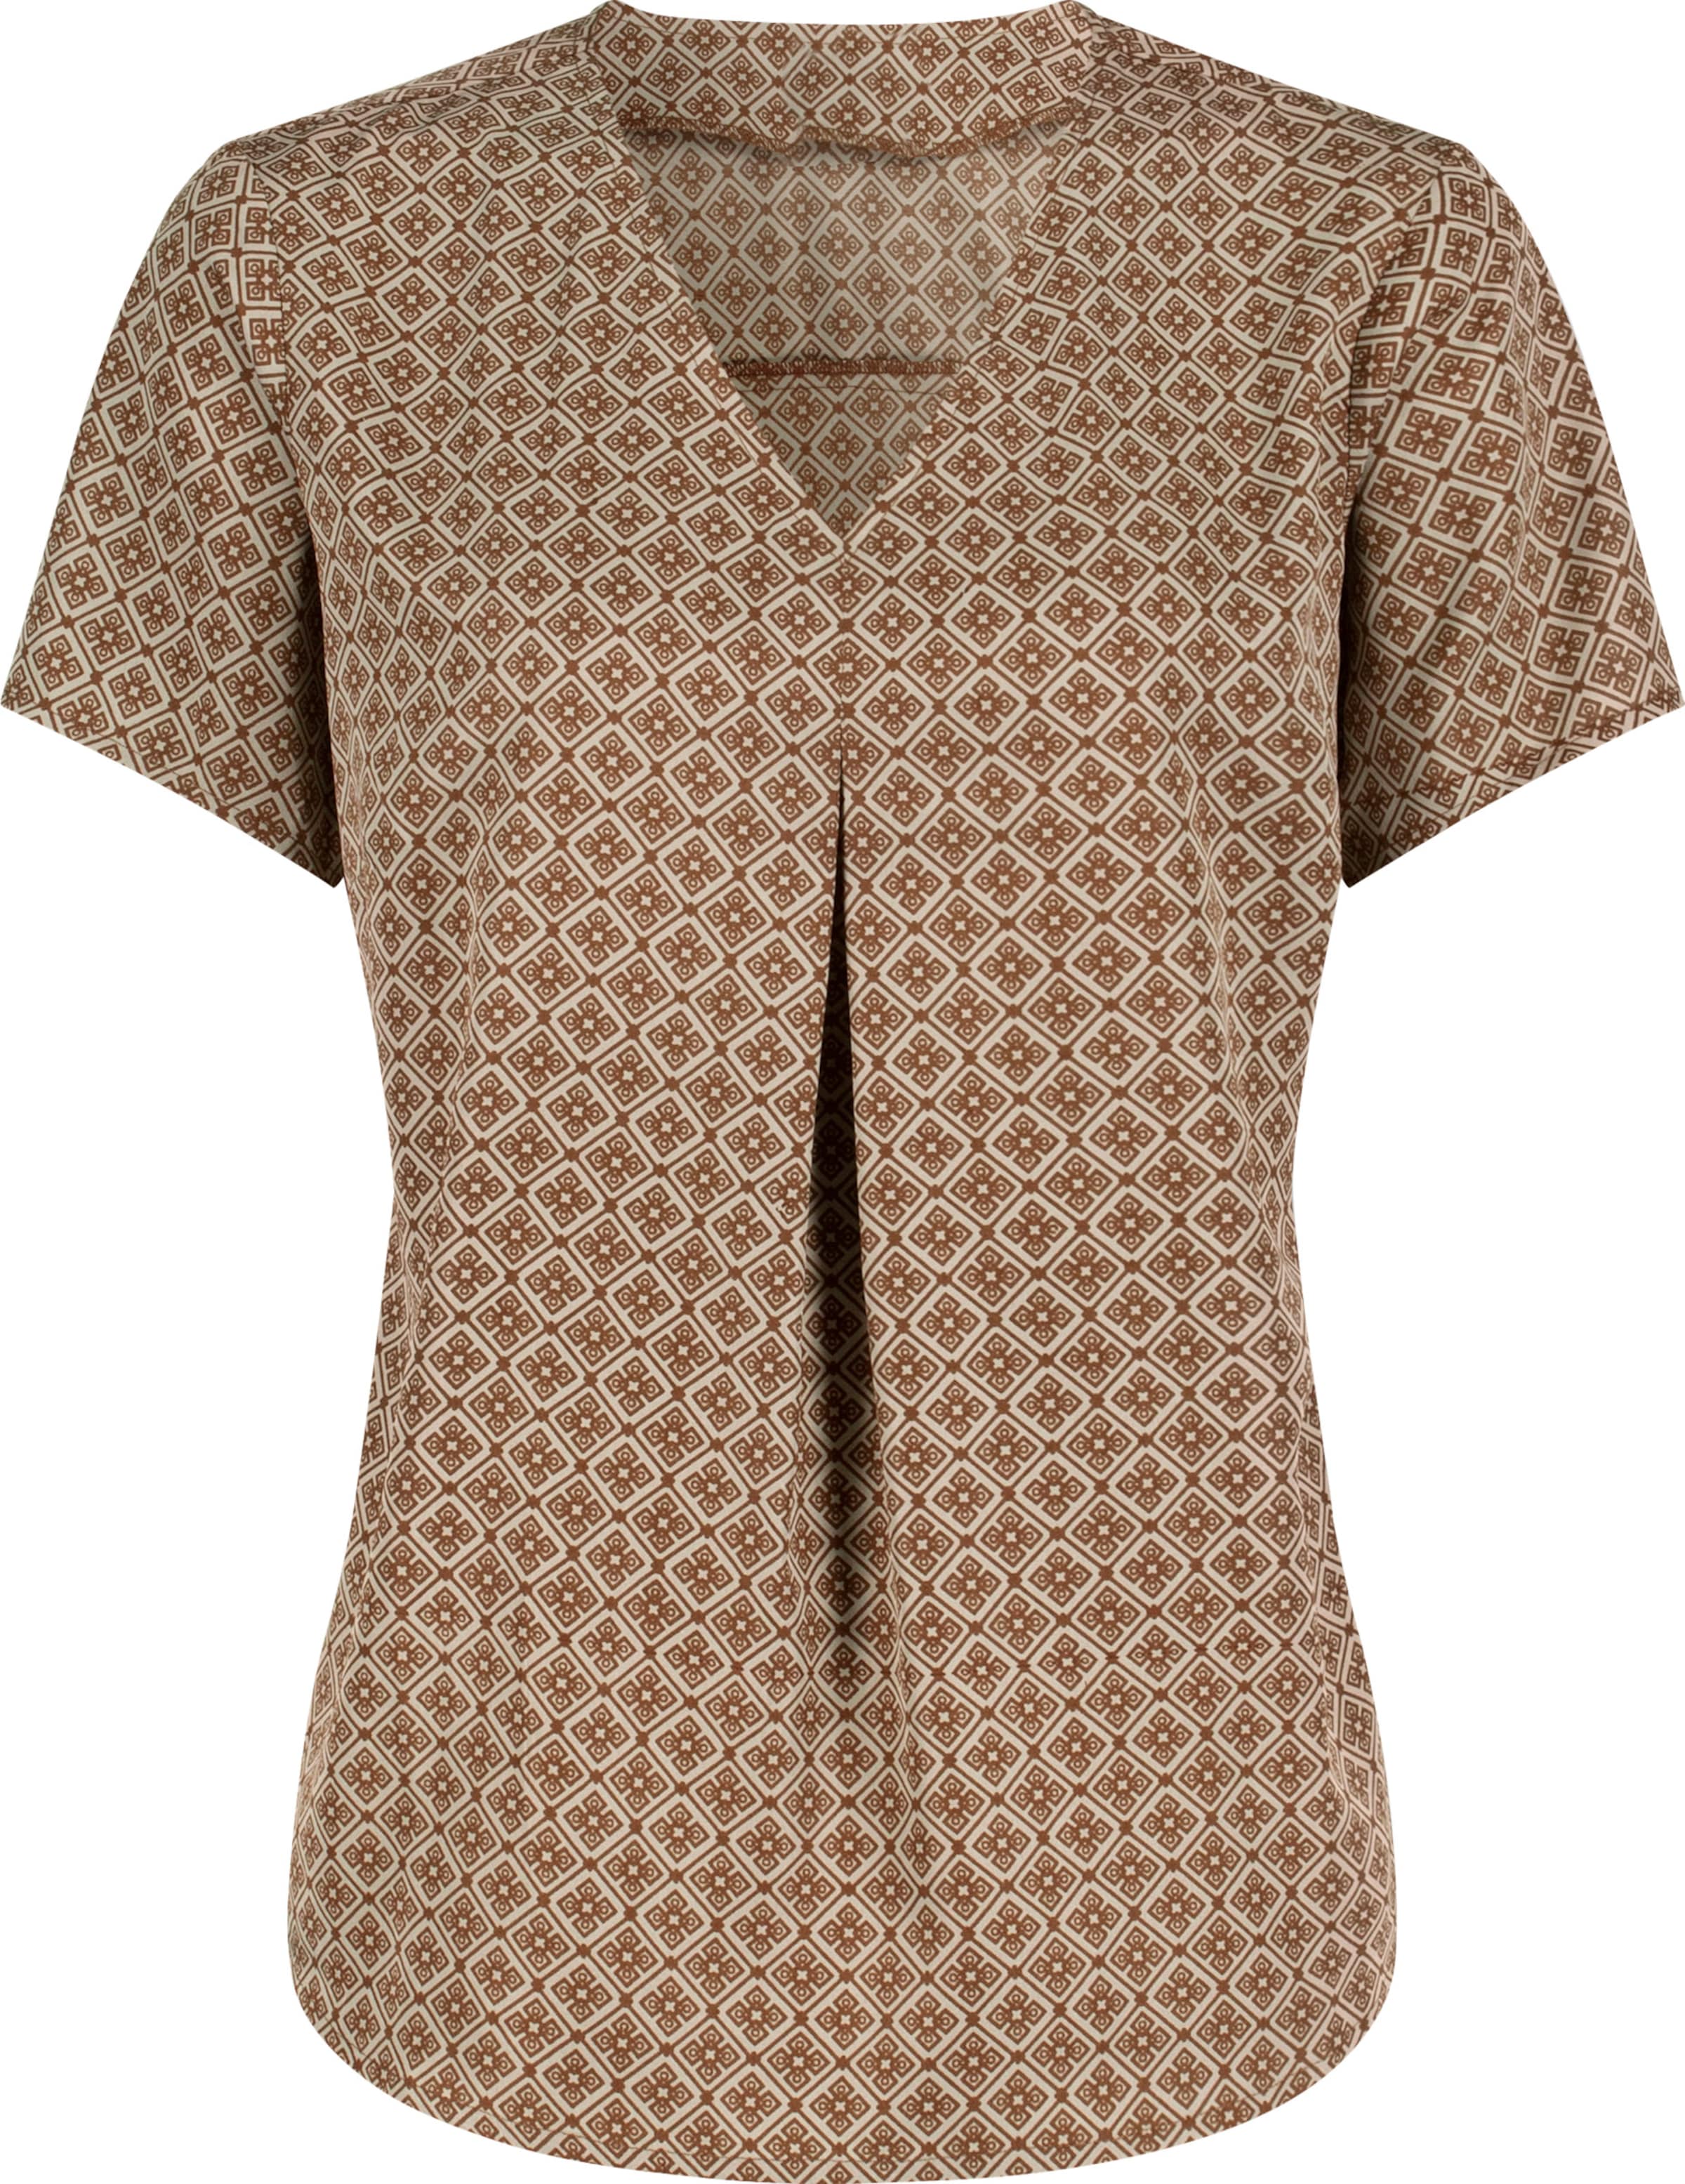 Your Look... for less! Dames Comfortabele blouse zand/bruin geprint Maat